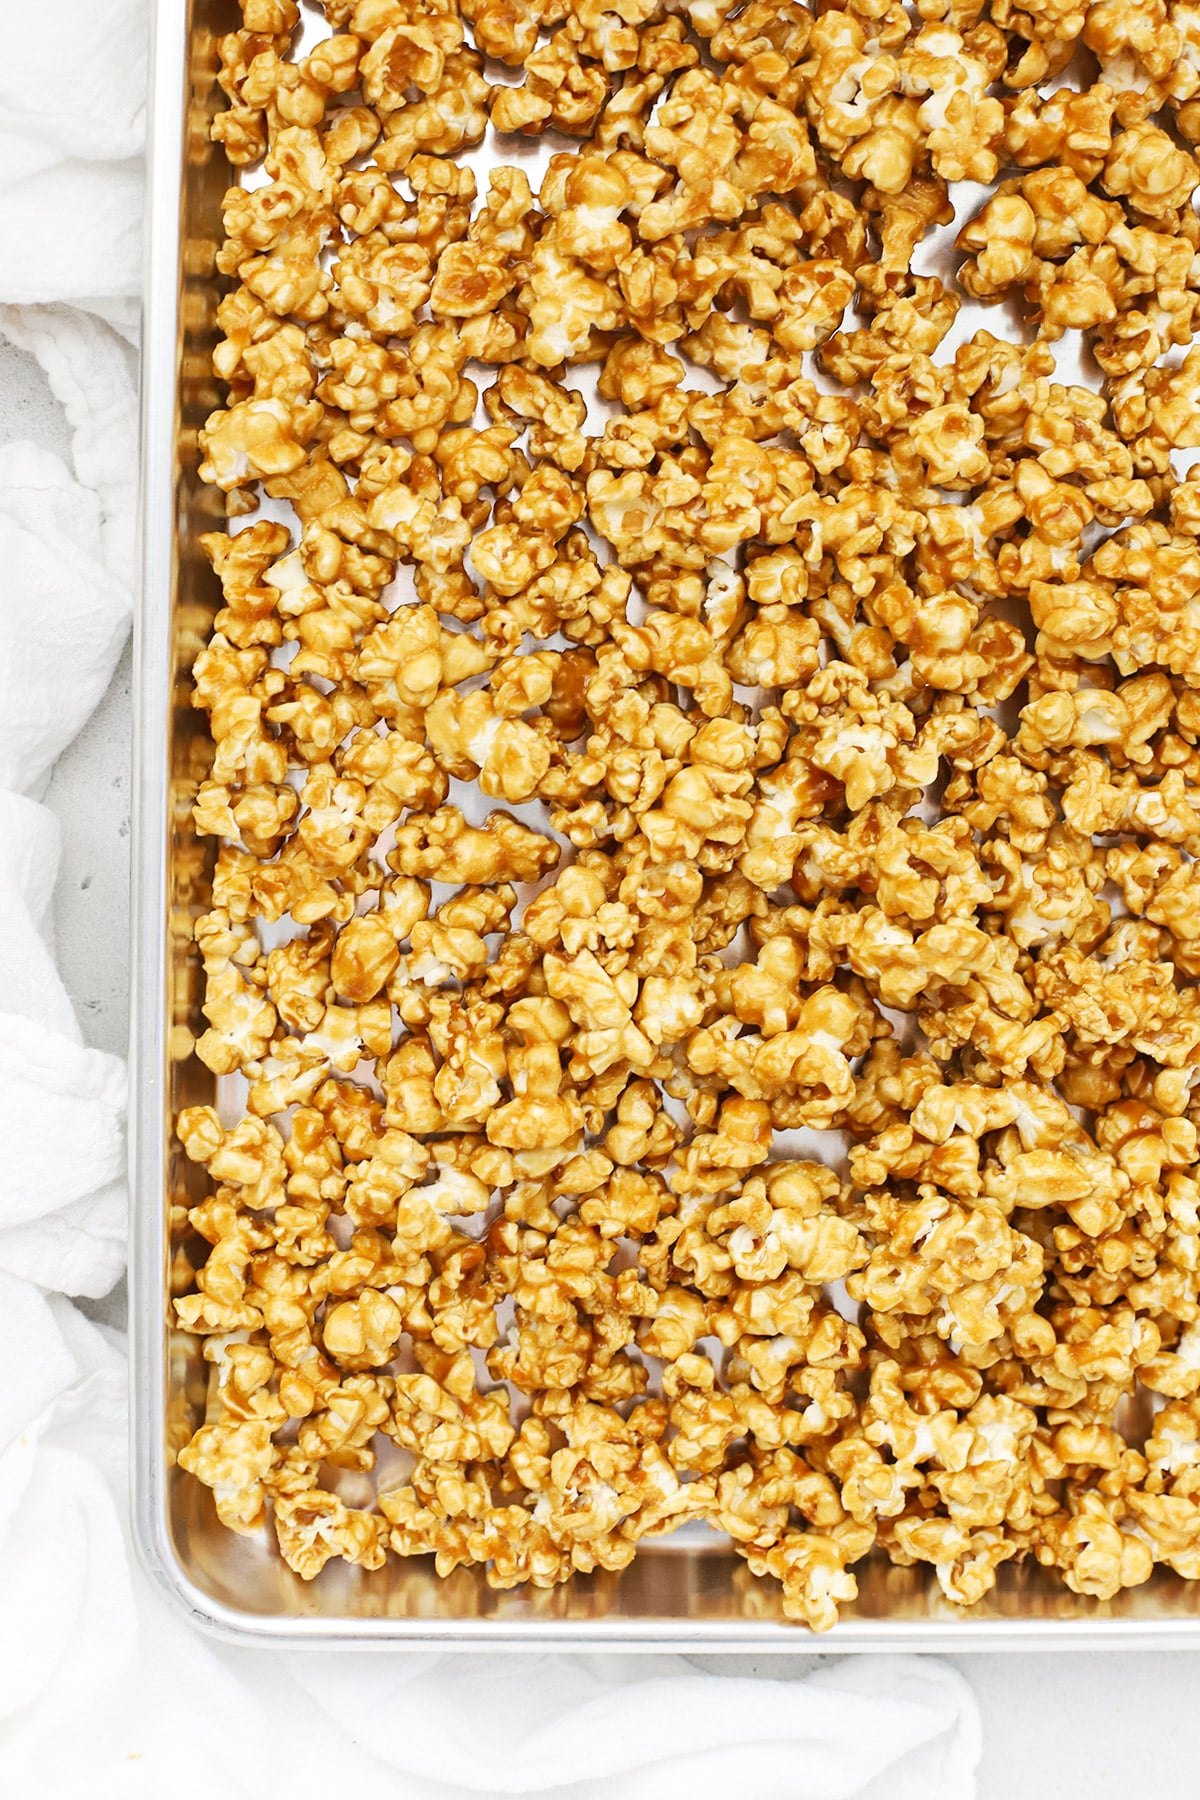 Overhead view of a sheet pan of caramel corn fresh from the oven